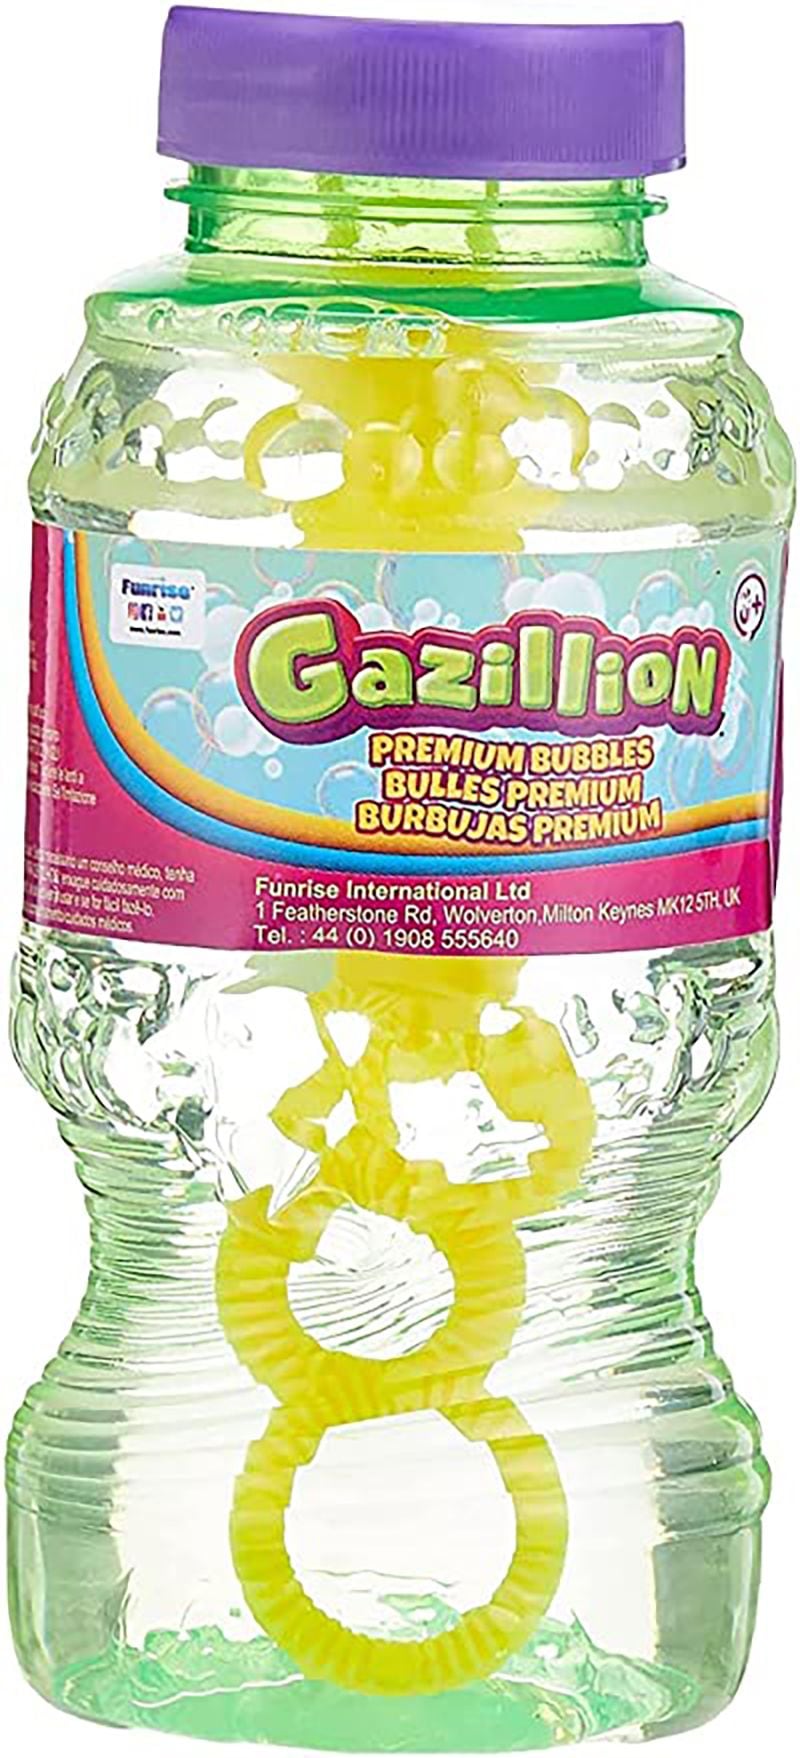 Four-pack of 8-oz Gazillion bubbles with wands. $9.48.